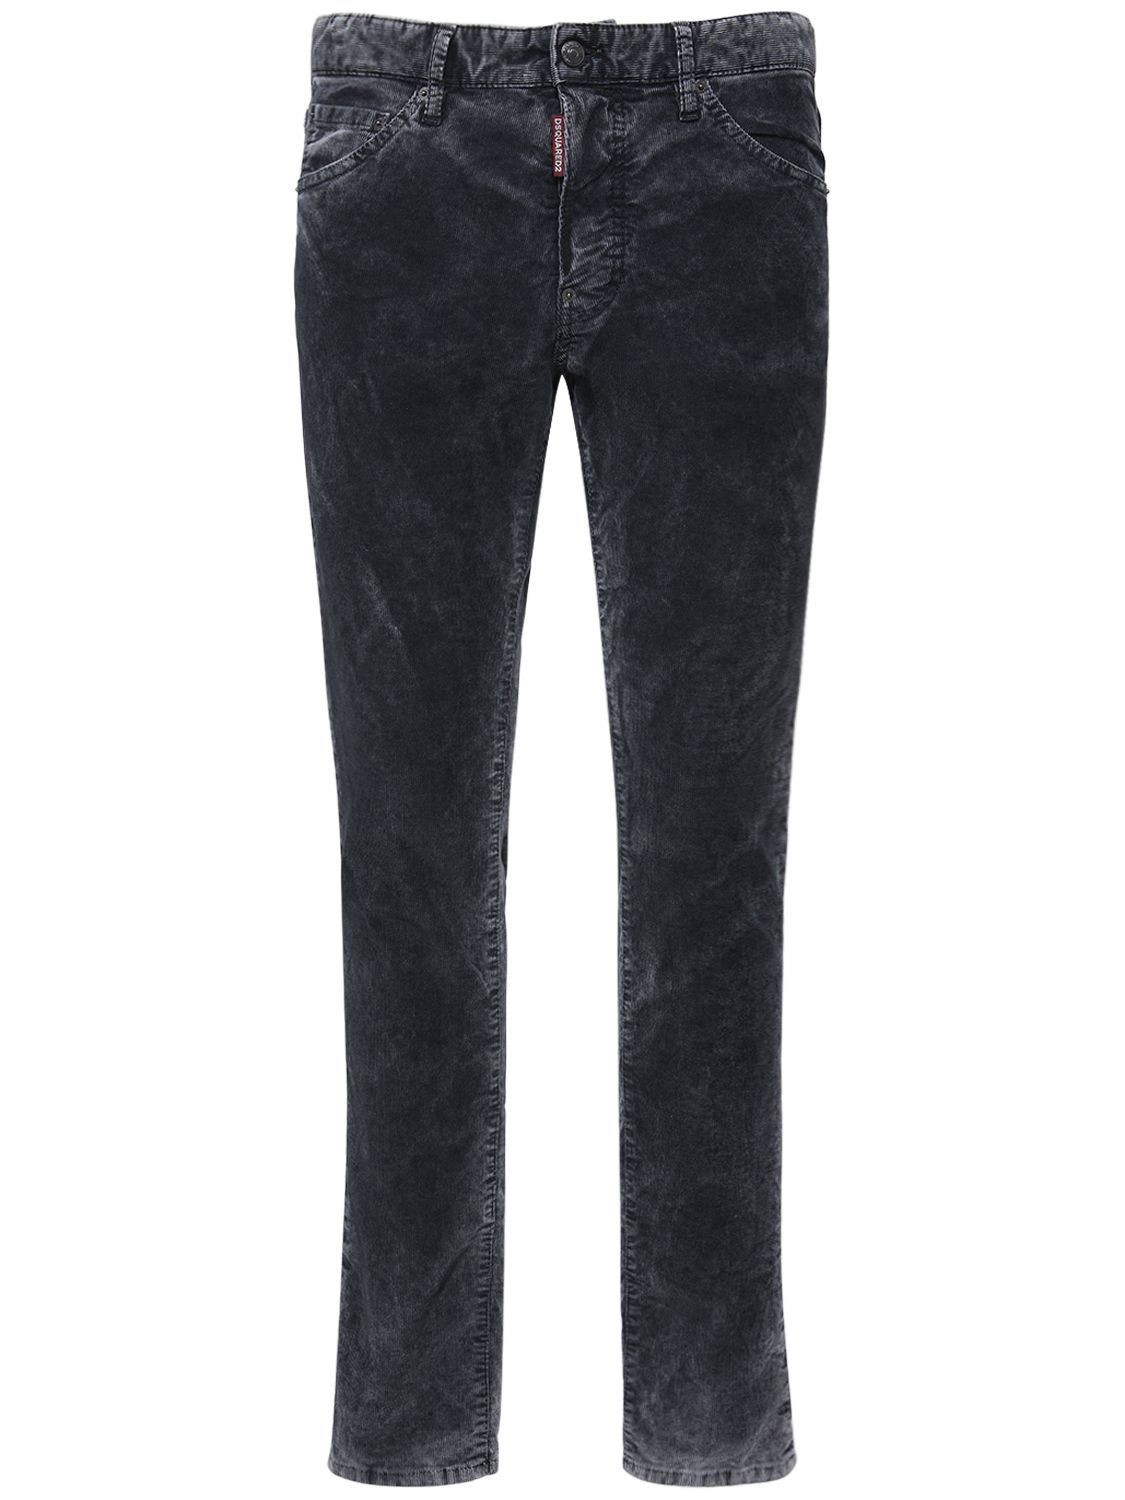 Cool Guy Marble Corduroy 5 Pocket Jeans